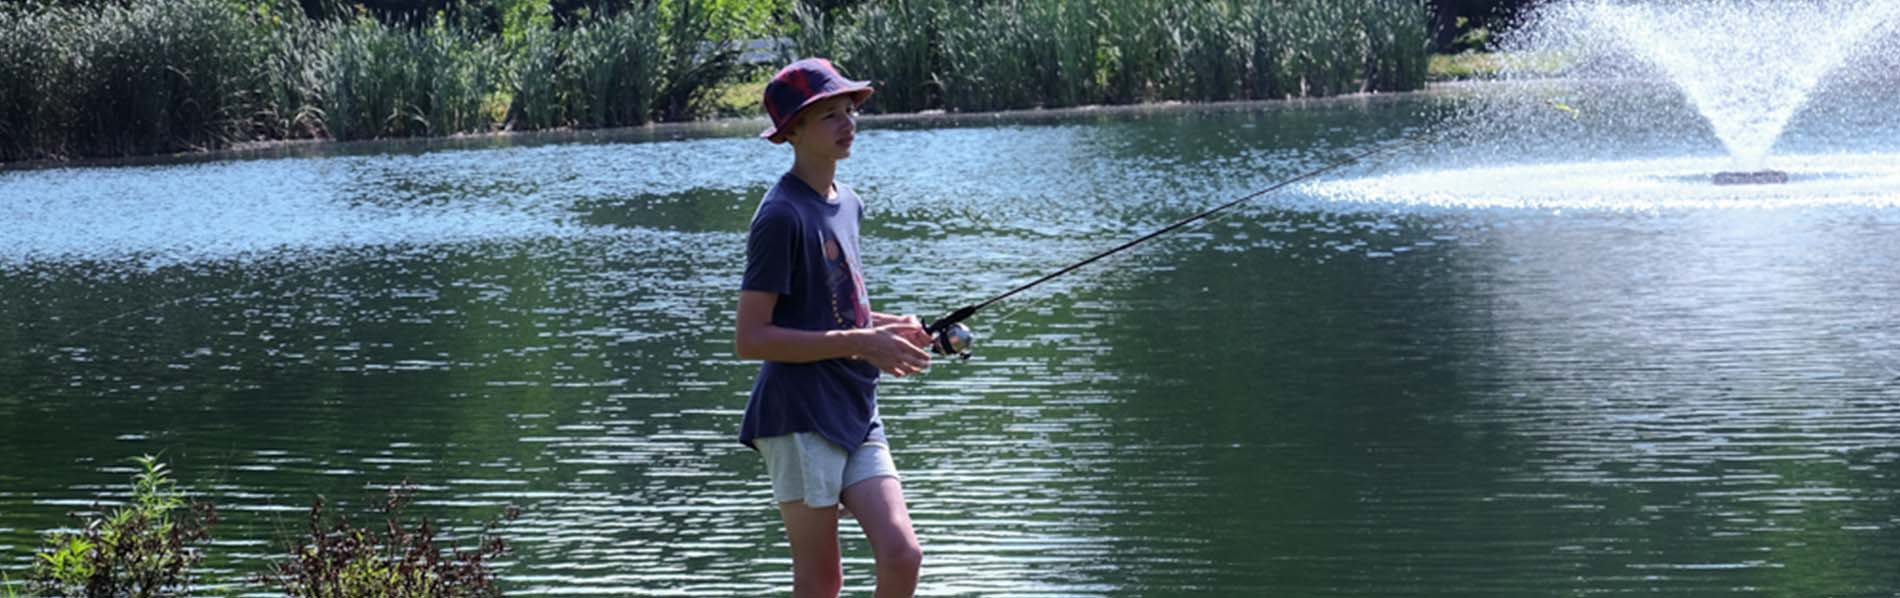 a young teen fishing on the pretty pond